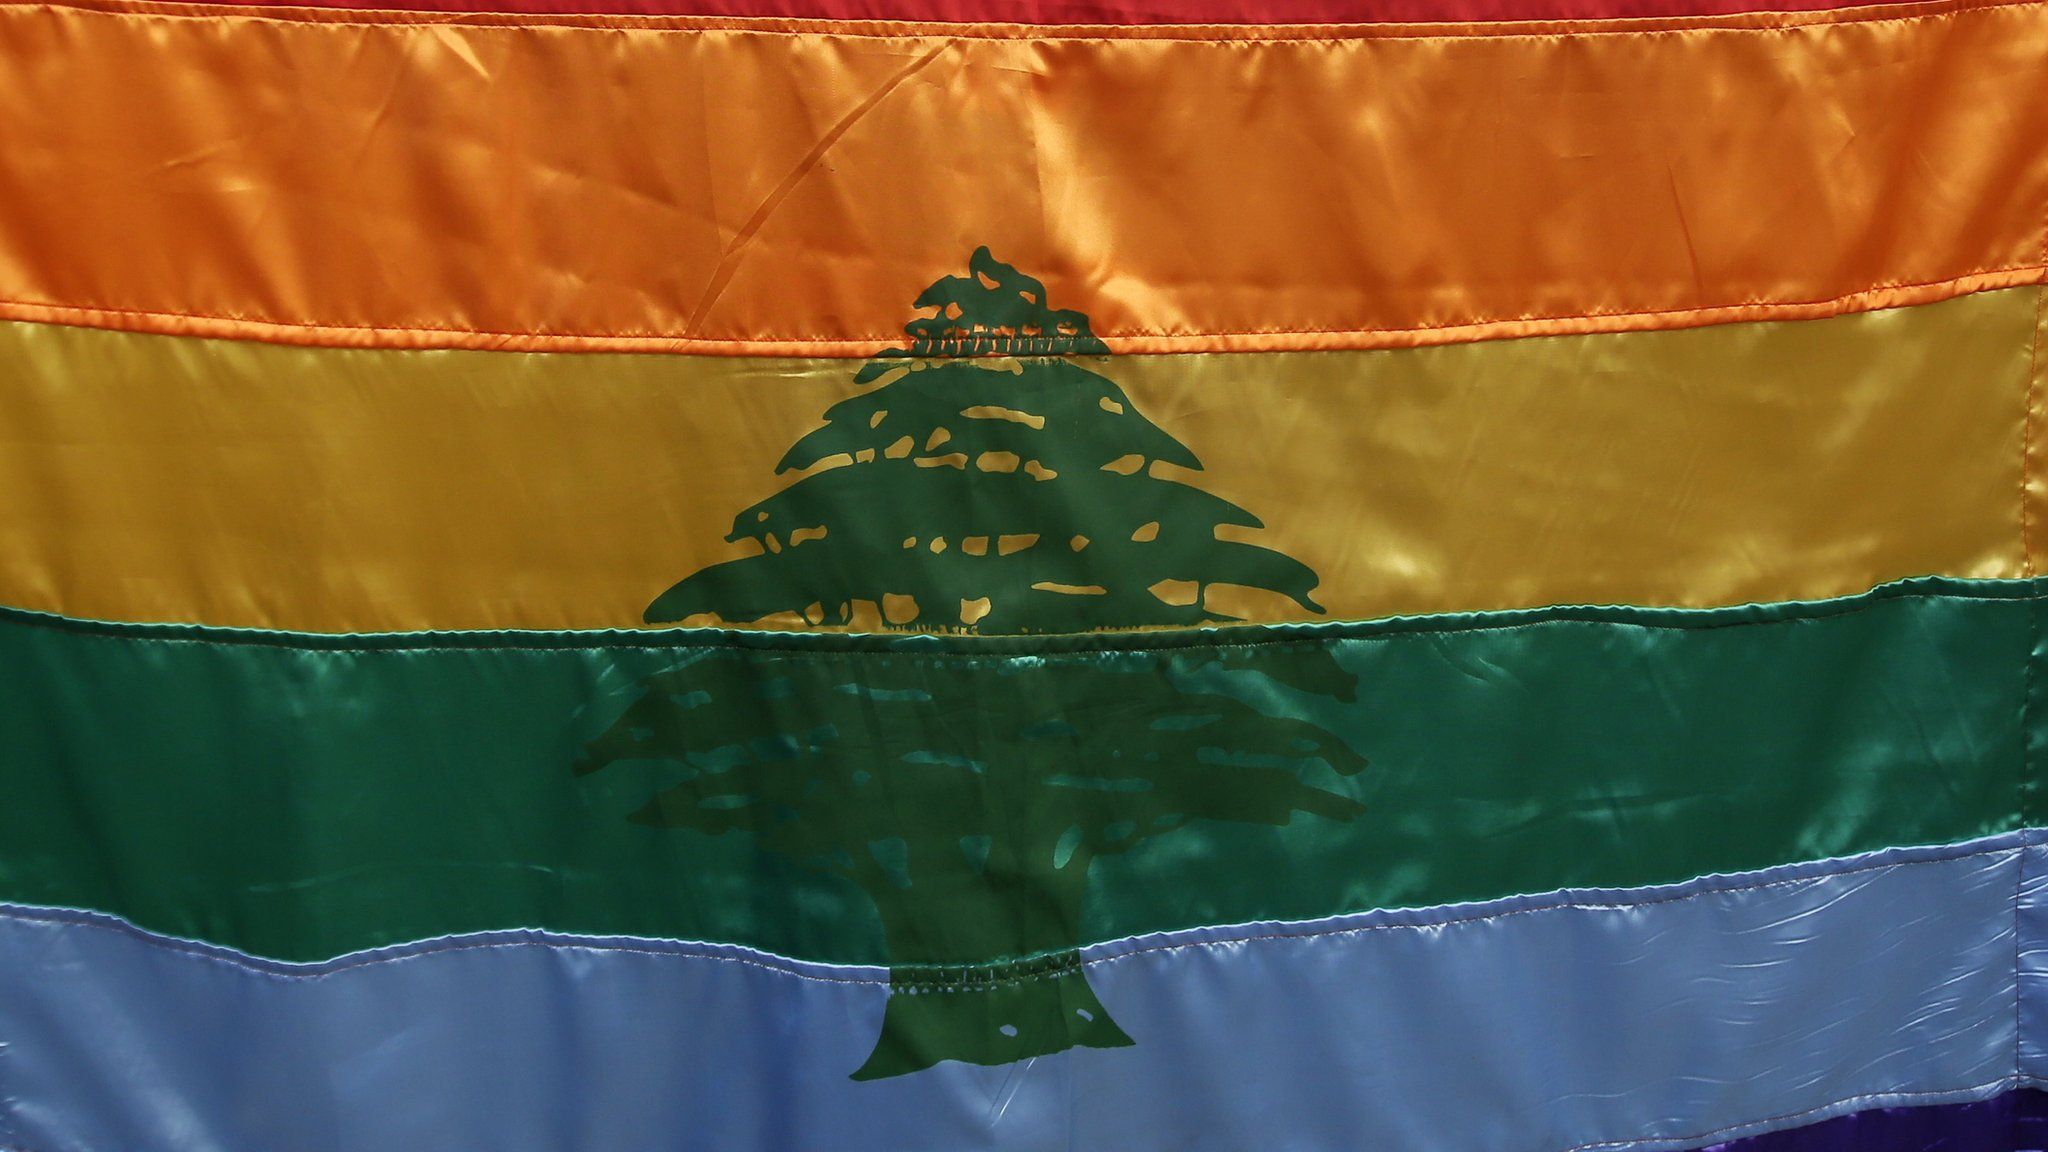 File photo showing a gay pride flag with the symbol of the cedar tree in the middle is carried by activists during an anti-homophobia rally in Beirut (30 April 2013)